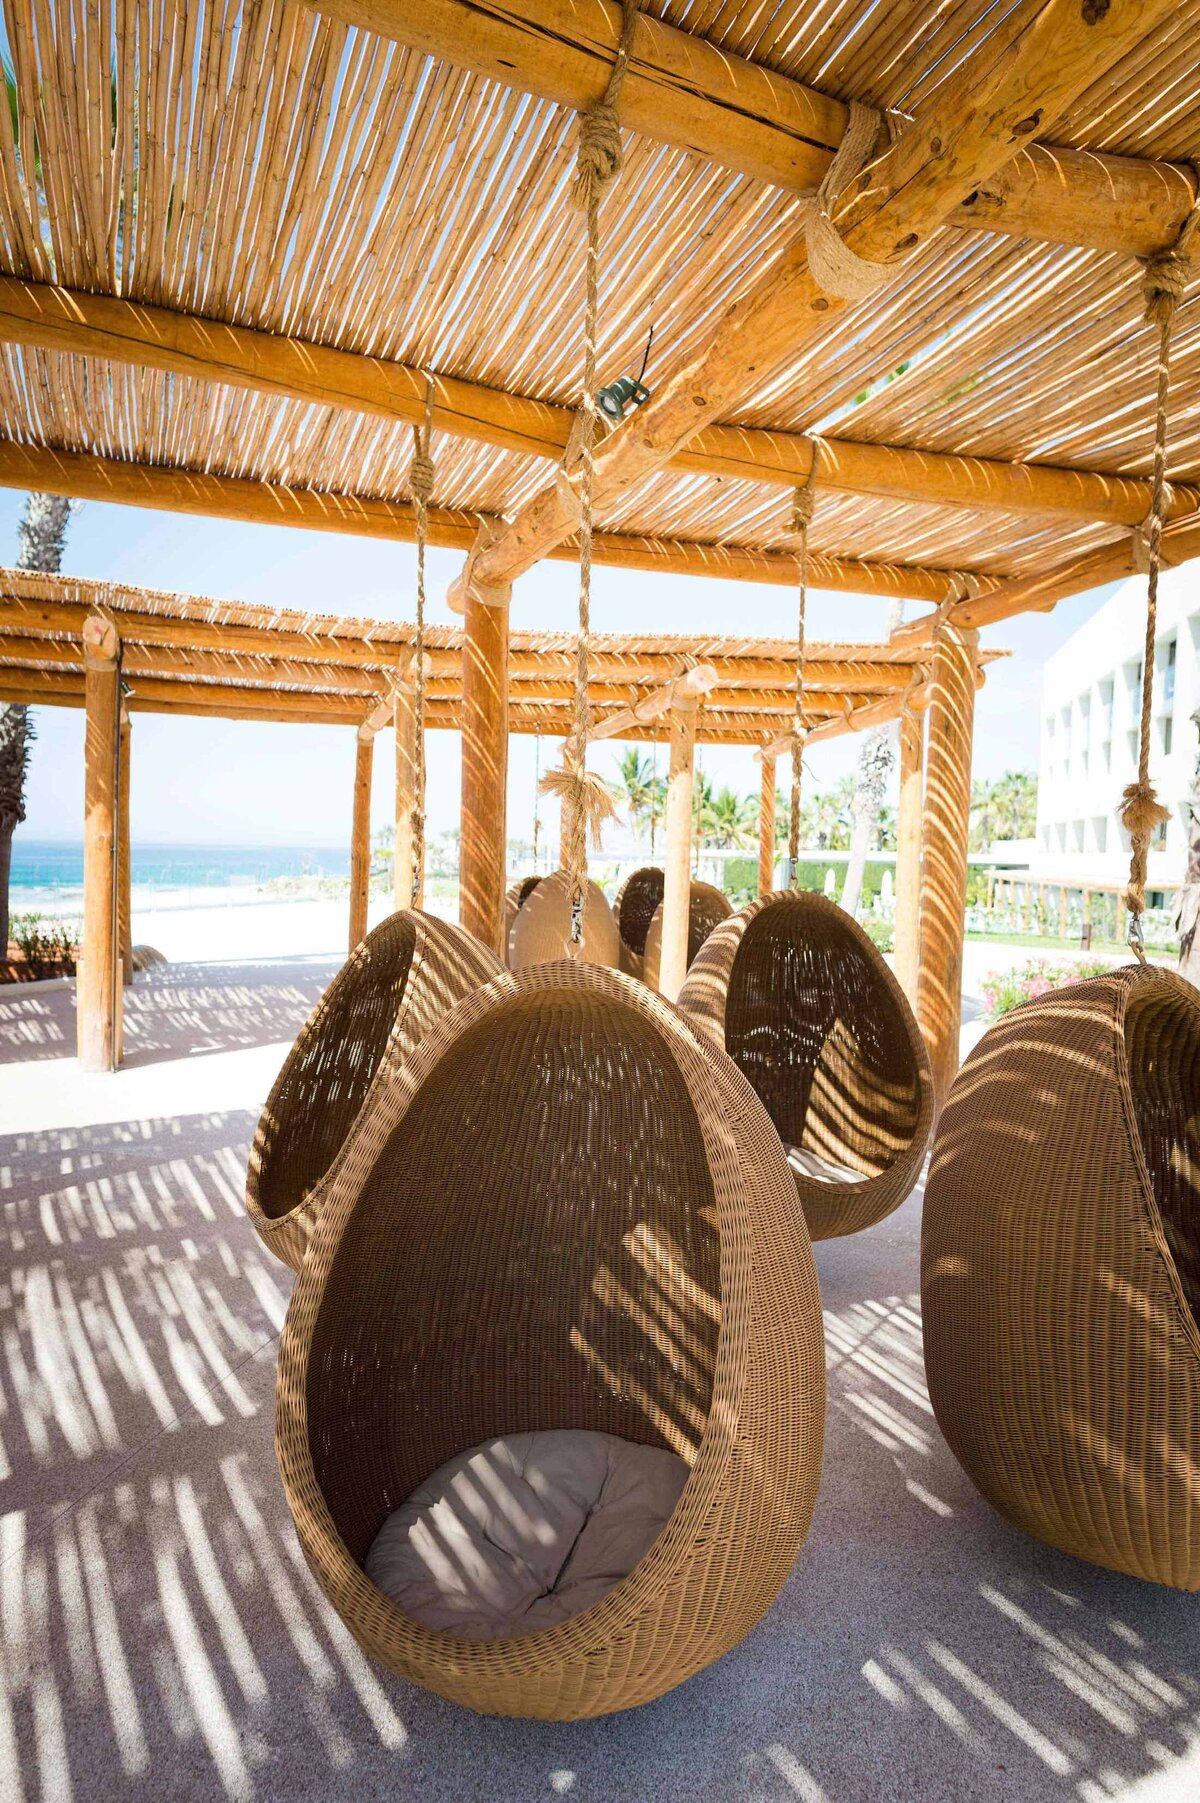 Unique wicker hanging pods outside resort define the atmosphere at Mauna Lani Hotel.